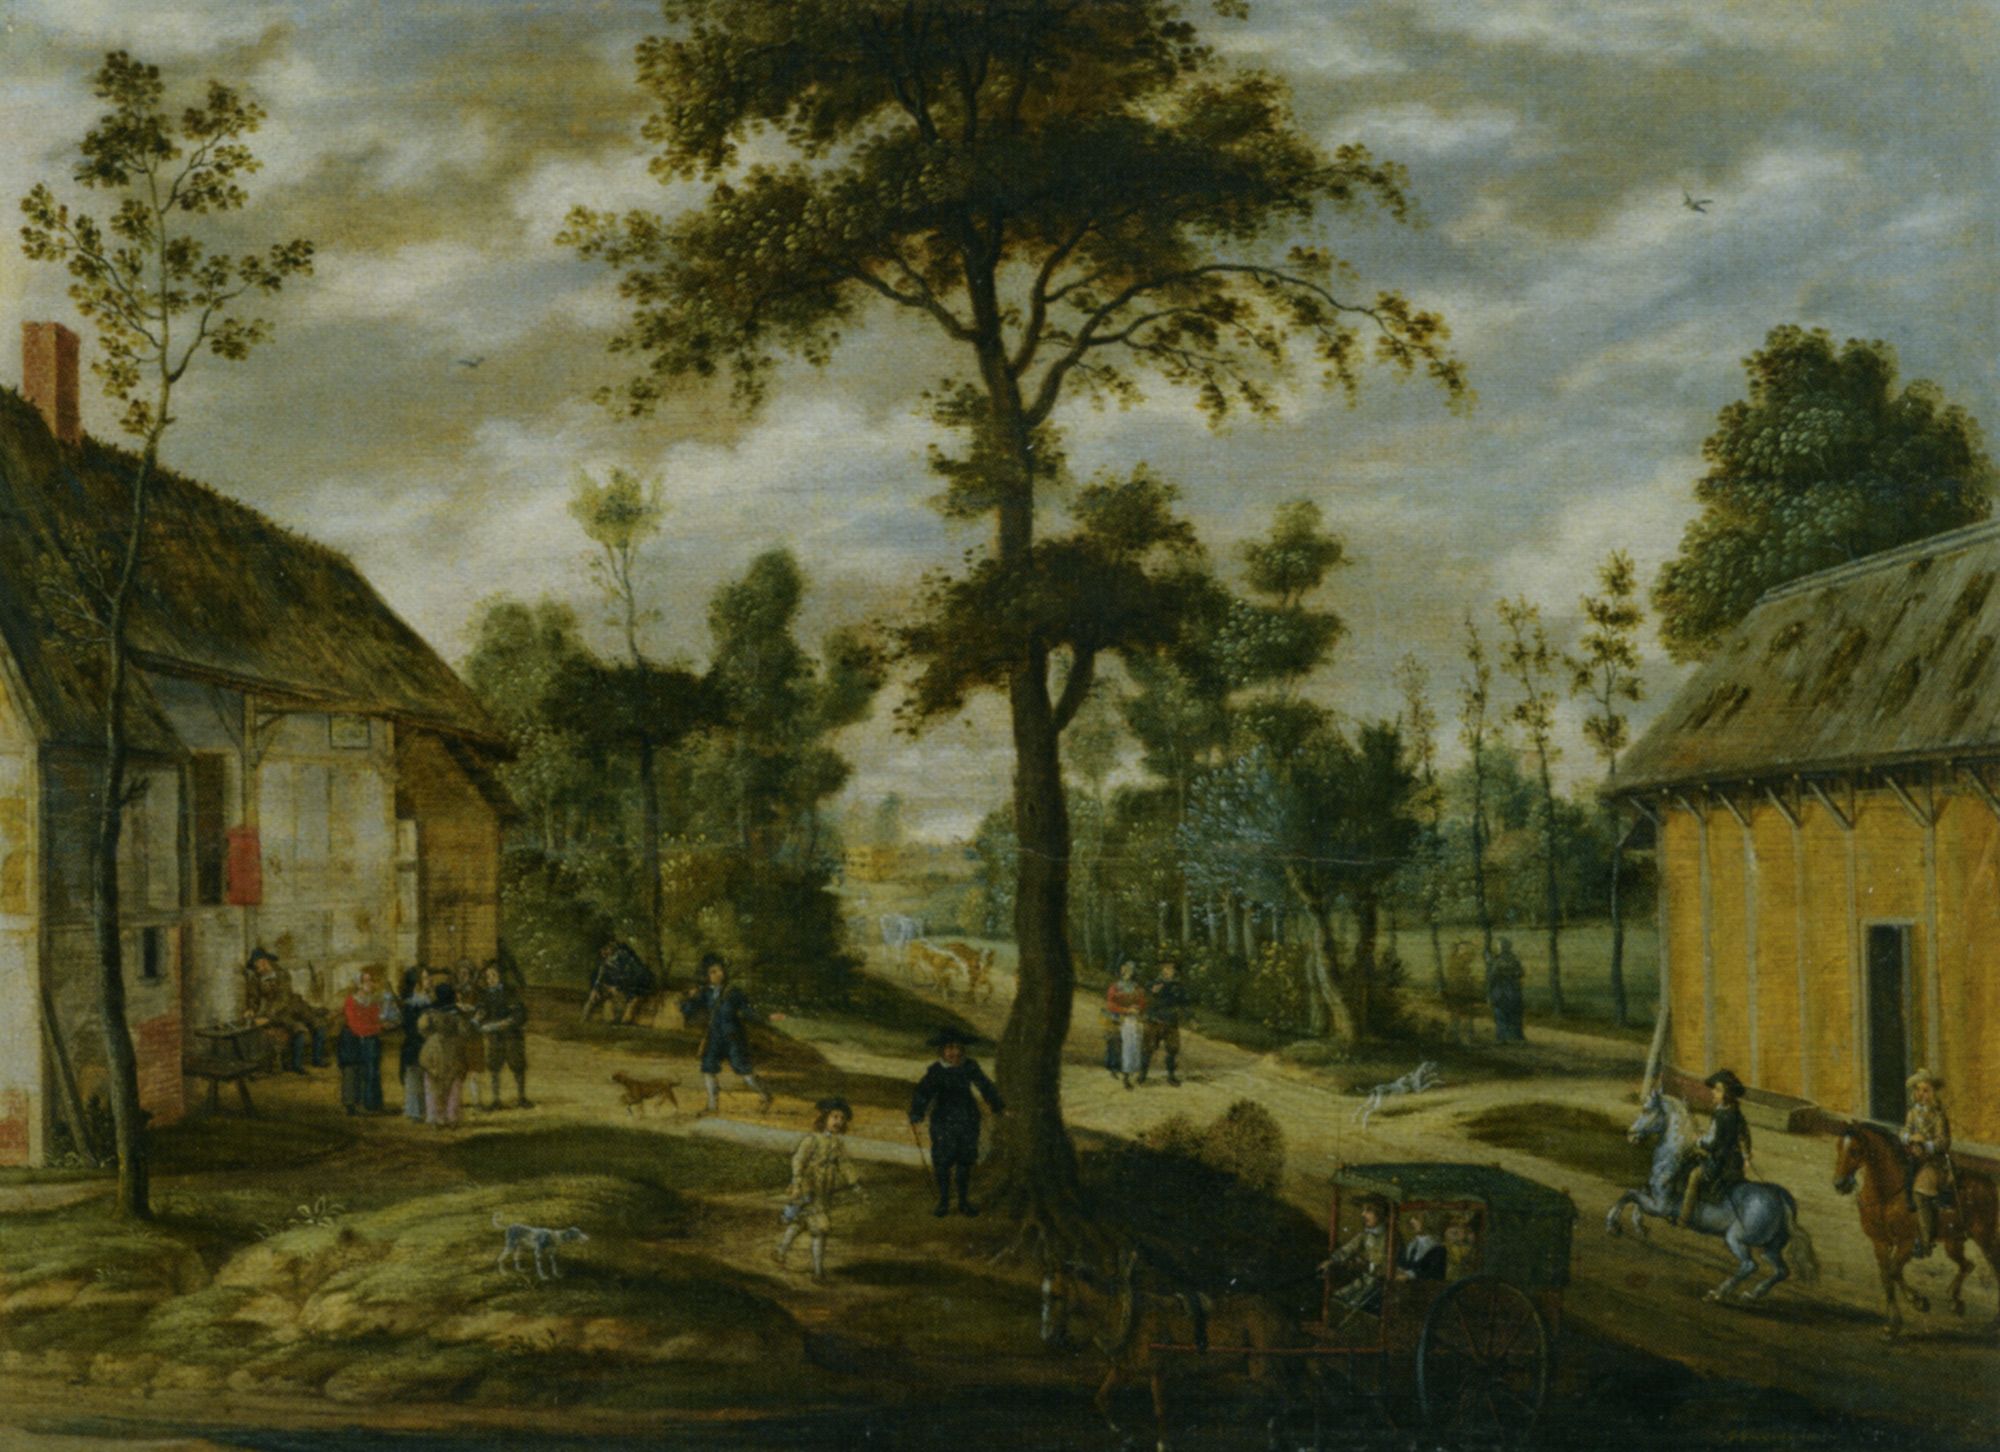 A Village Scene Outside an Inn with Two Horsemen and a Carriage Halted in the Foreground by Isaac van Oosten